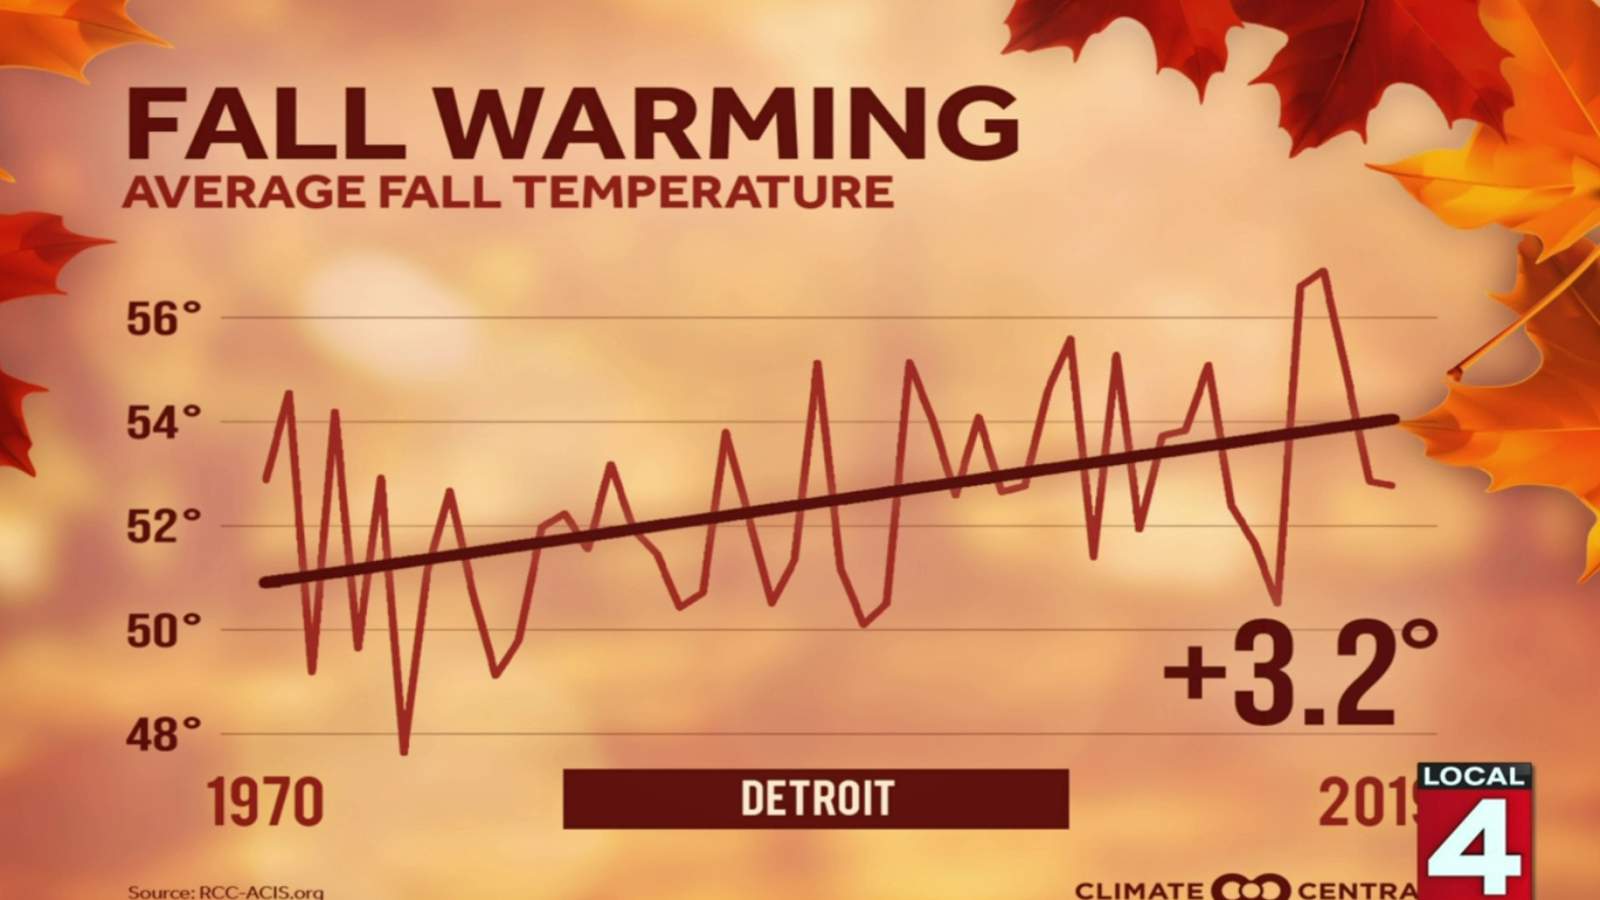 Average fall temperatures in Detroit up 3.2 degrees since 1970